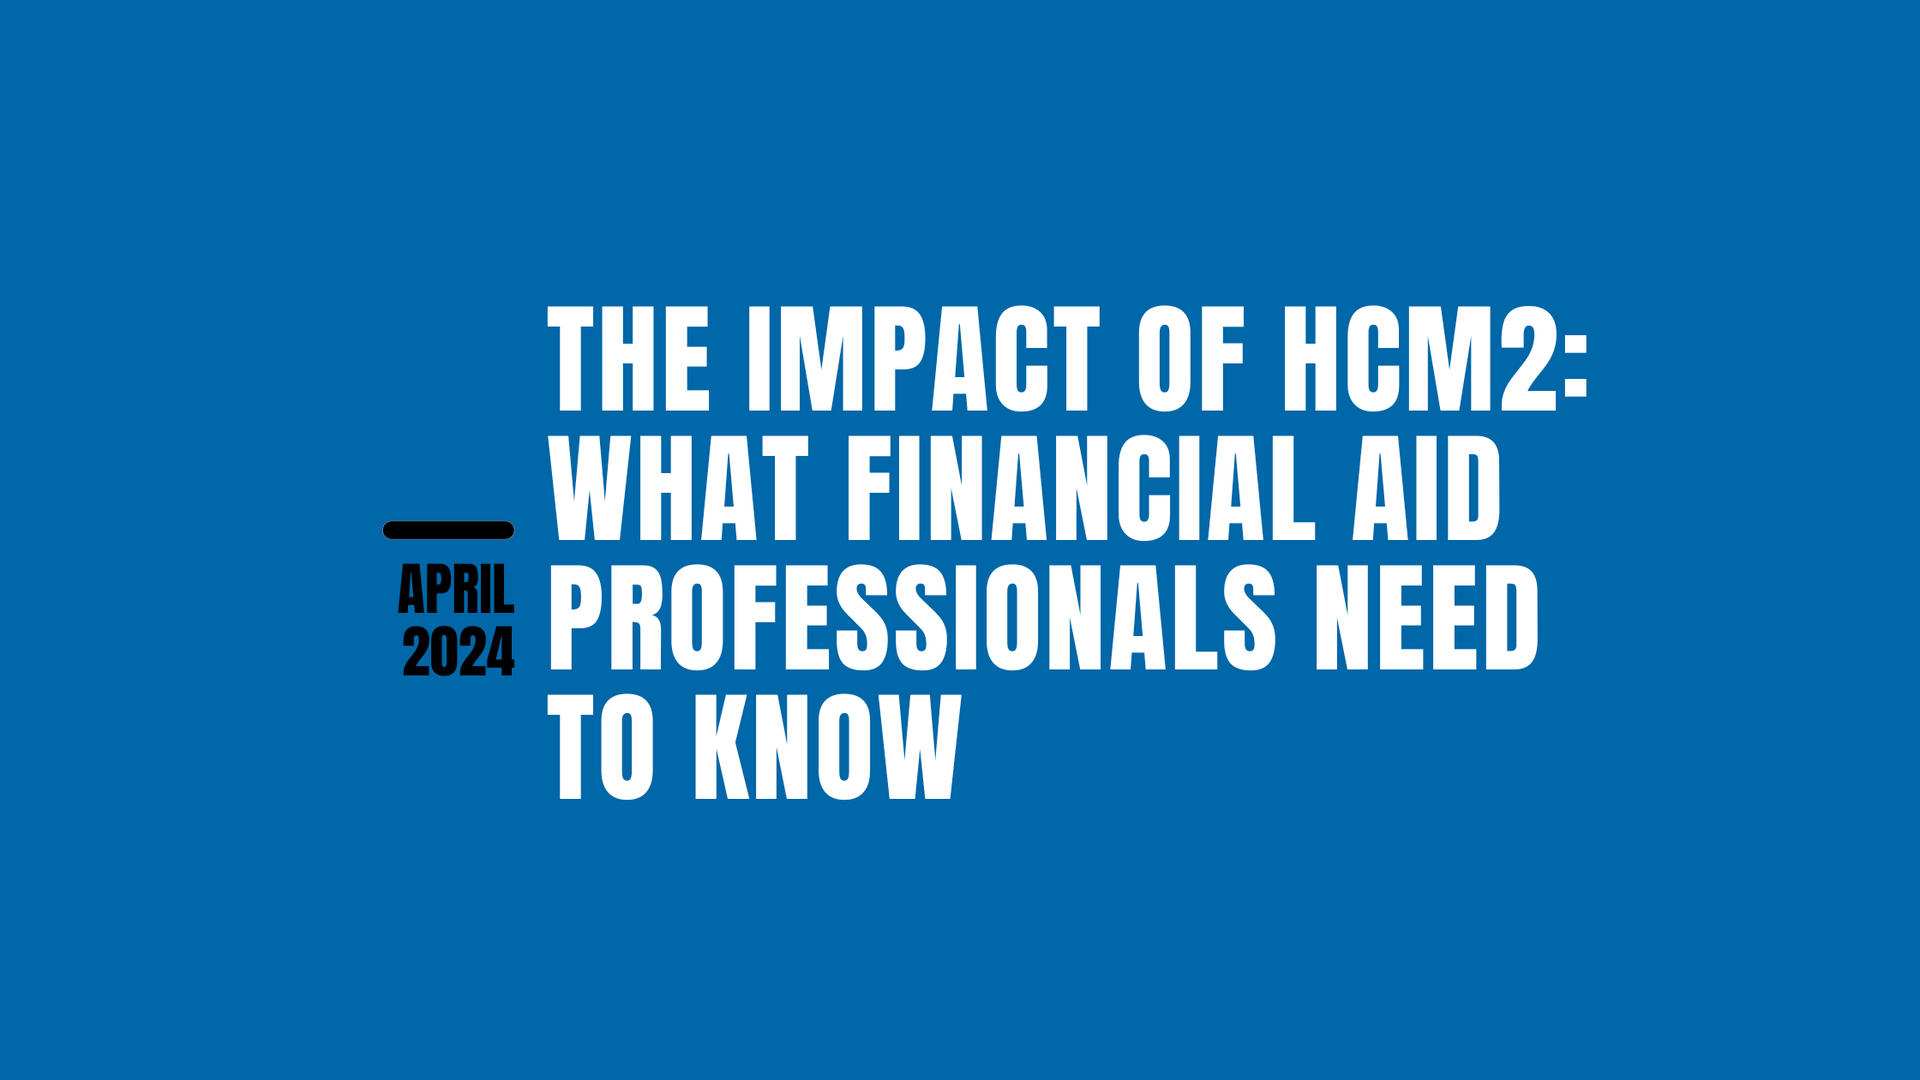 HCM2: What Financial Aid Professionals Need to Know